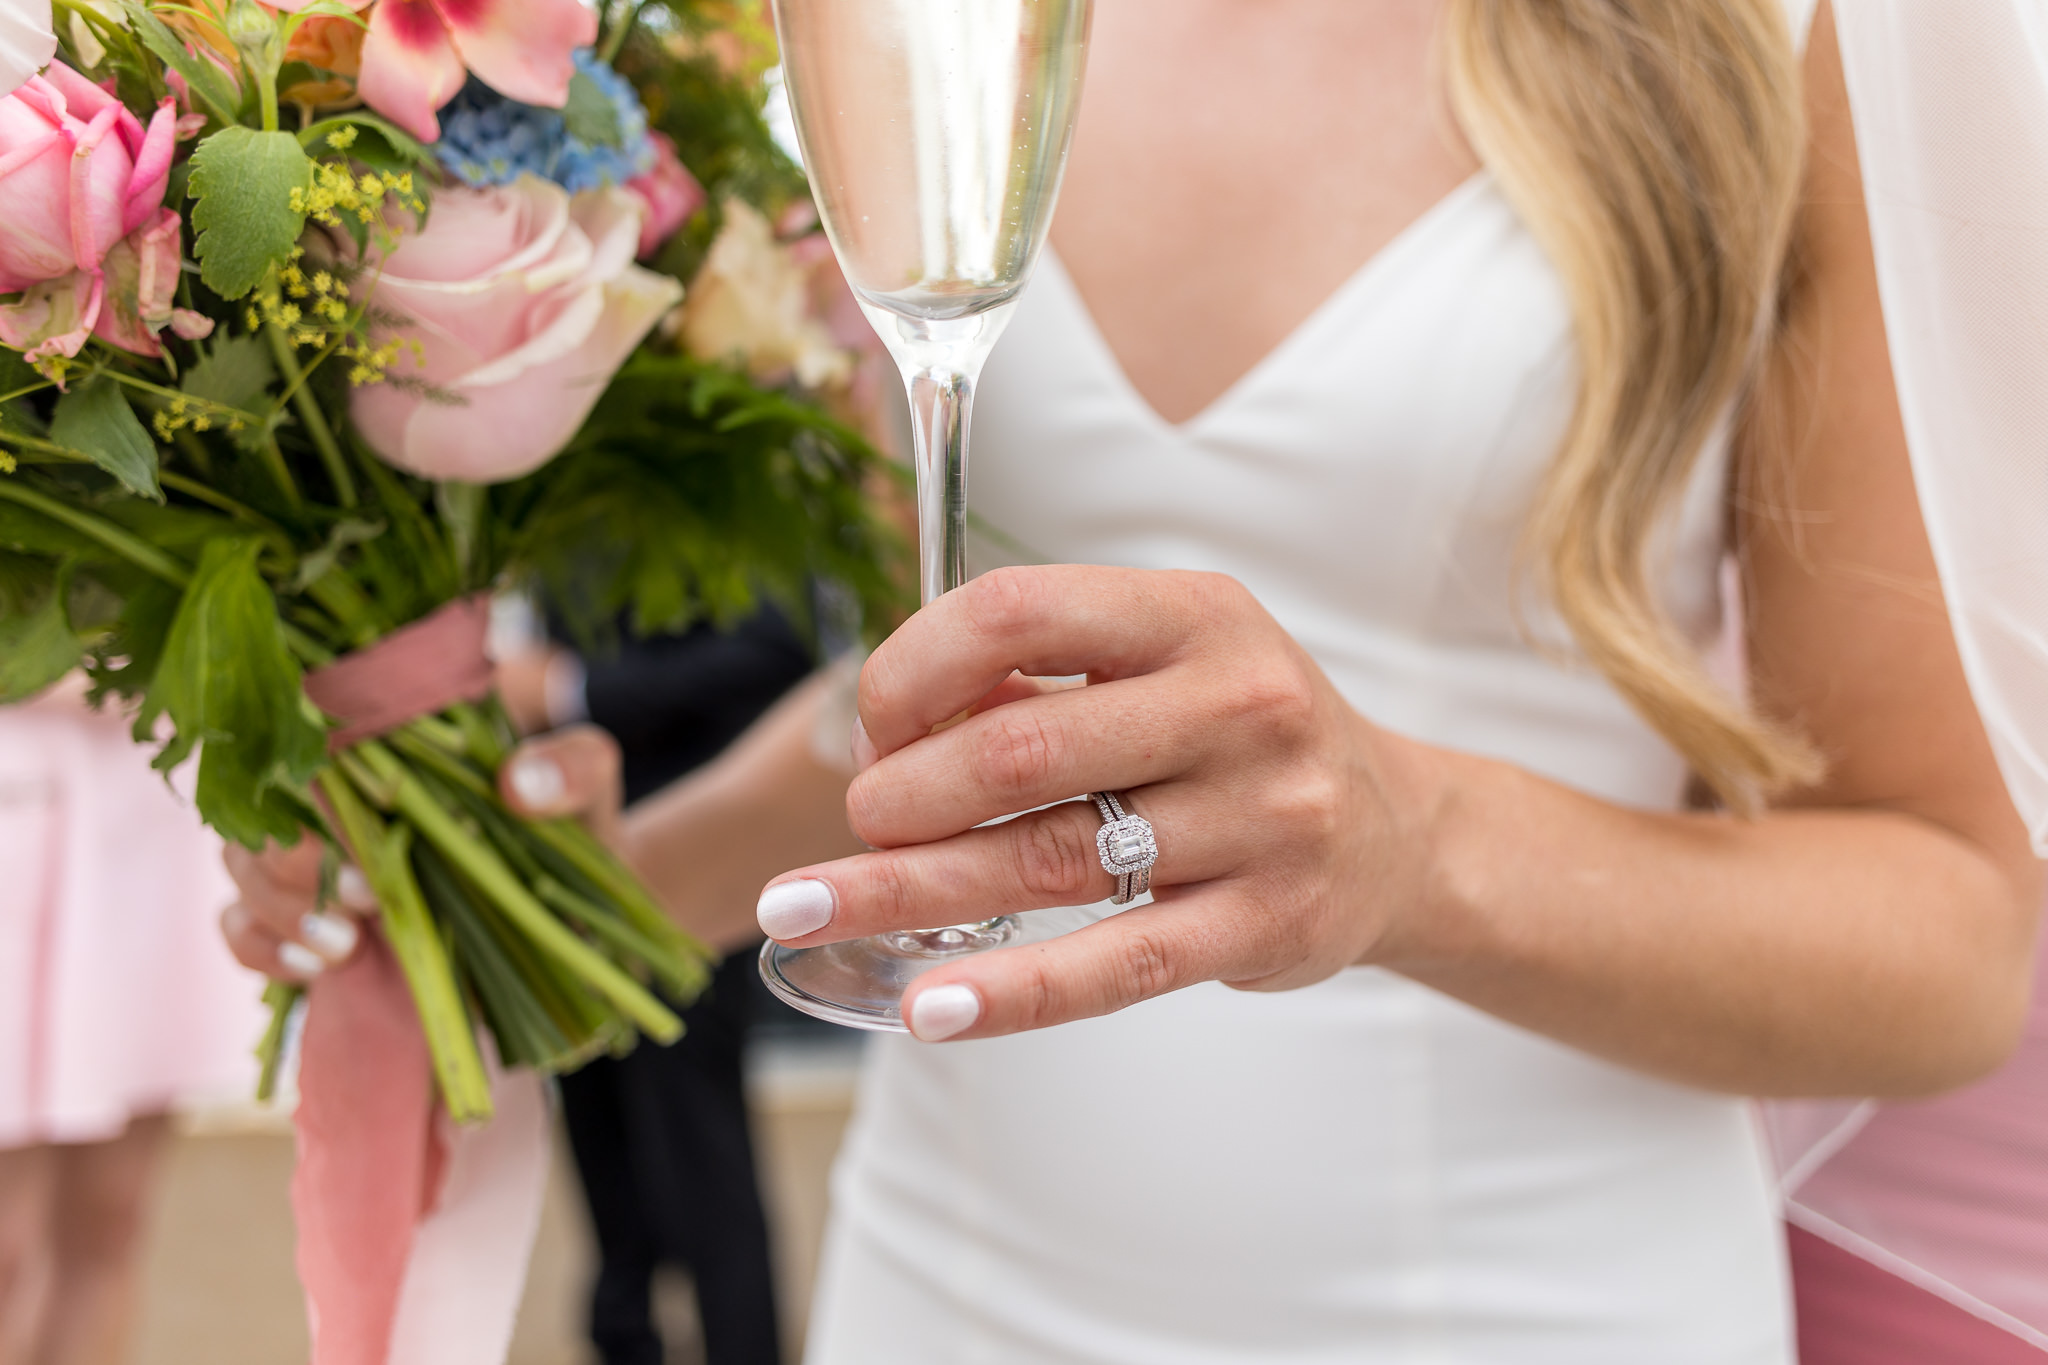 Bride holding a champagne glass , her wedding ring is visible